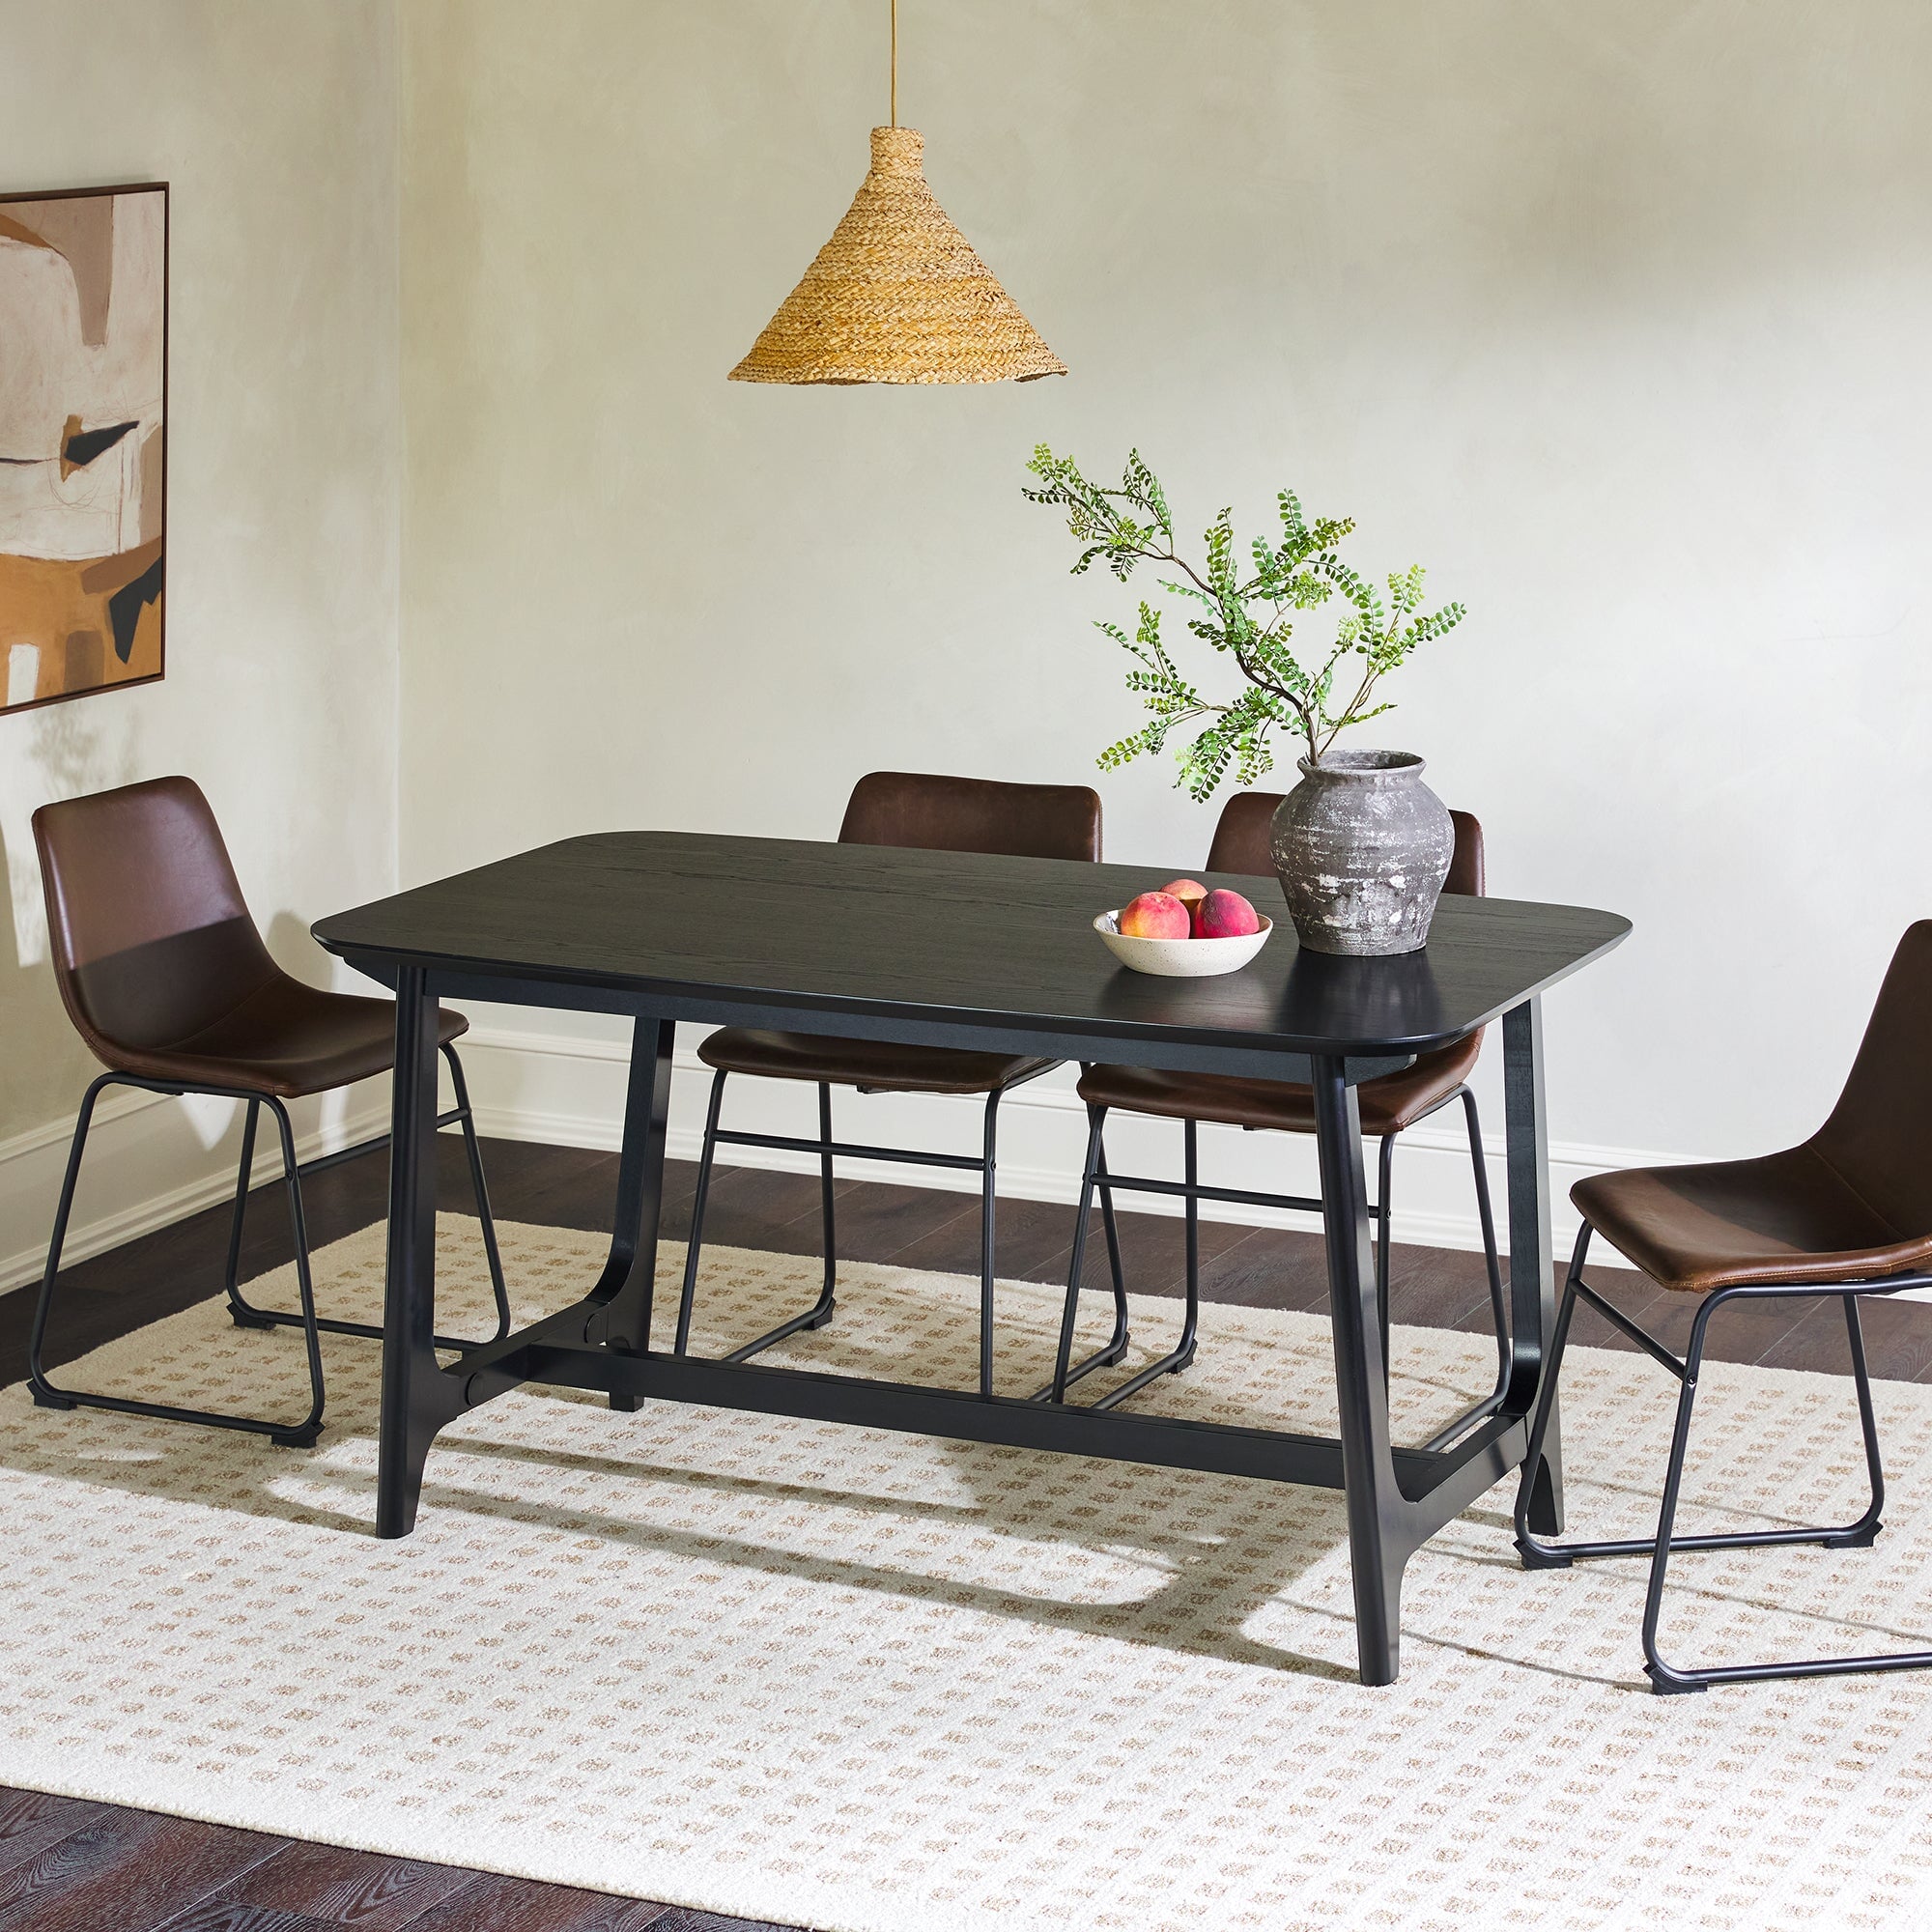 Sammen 60" Mid-Century Dining Table with Trestle Base